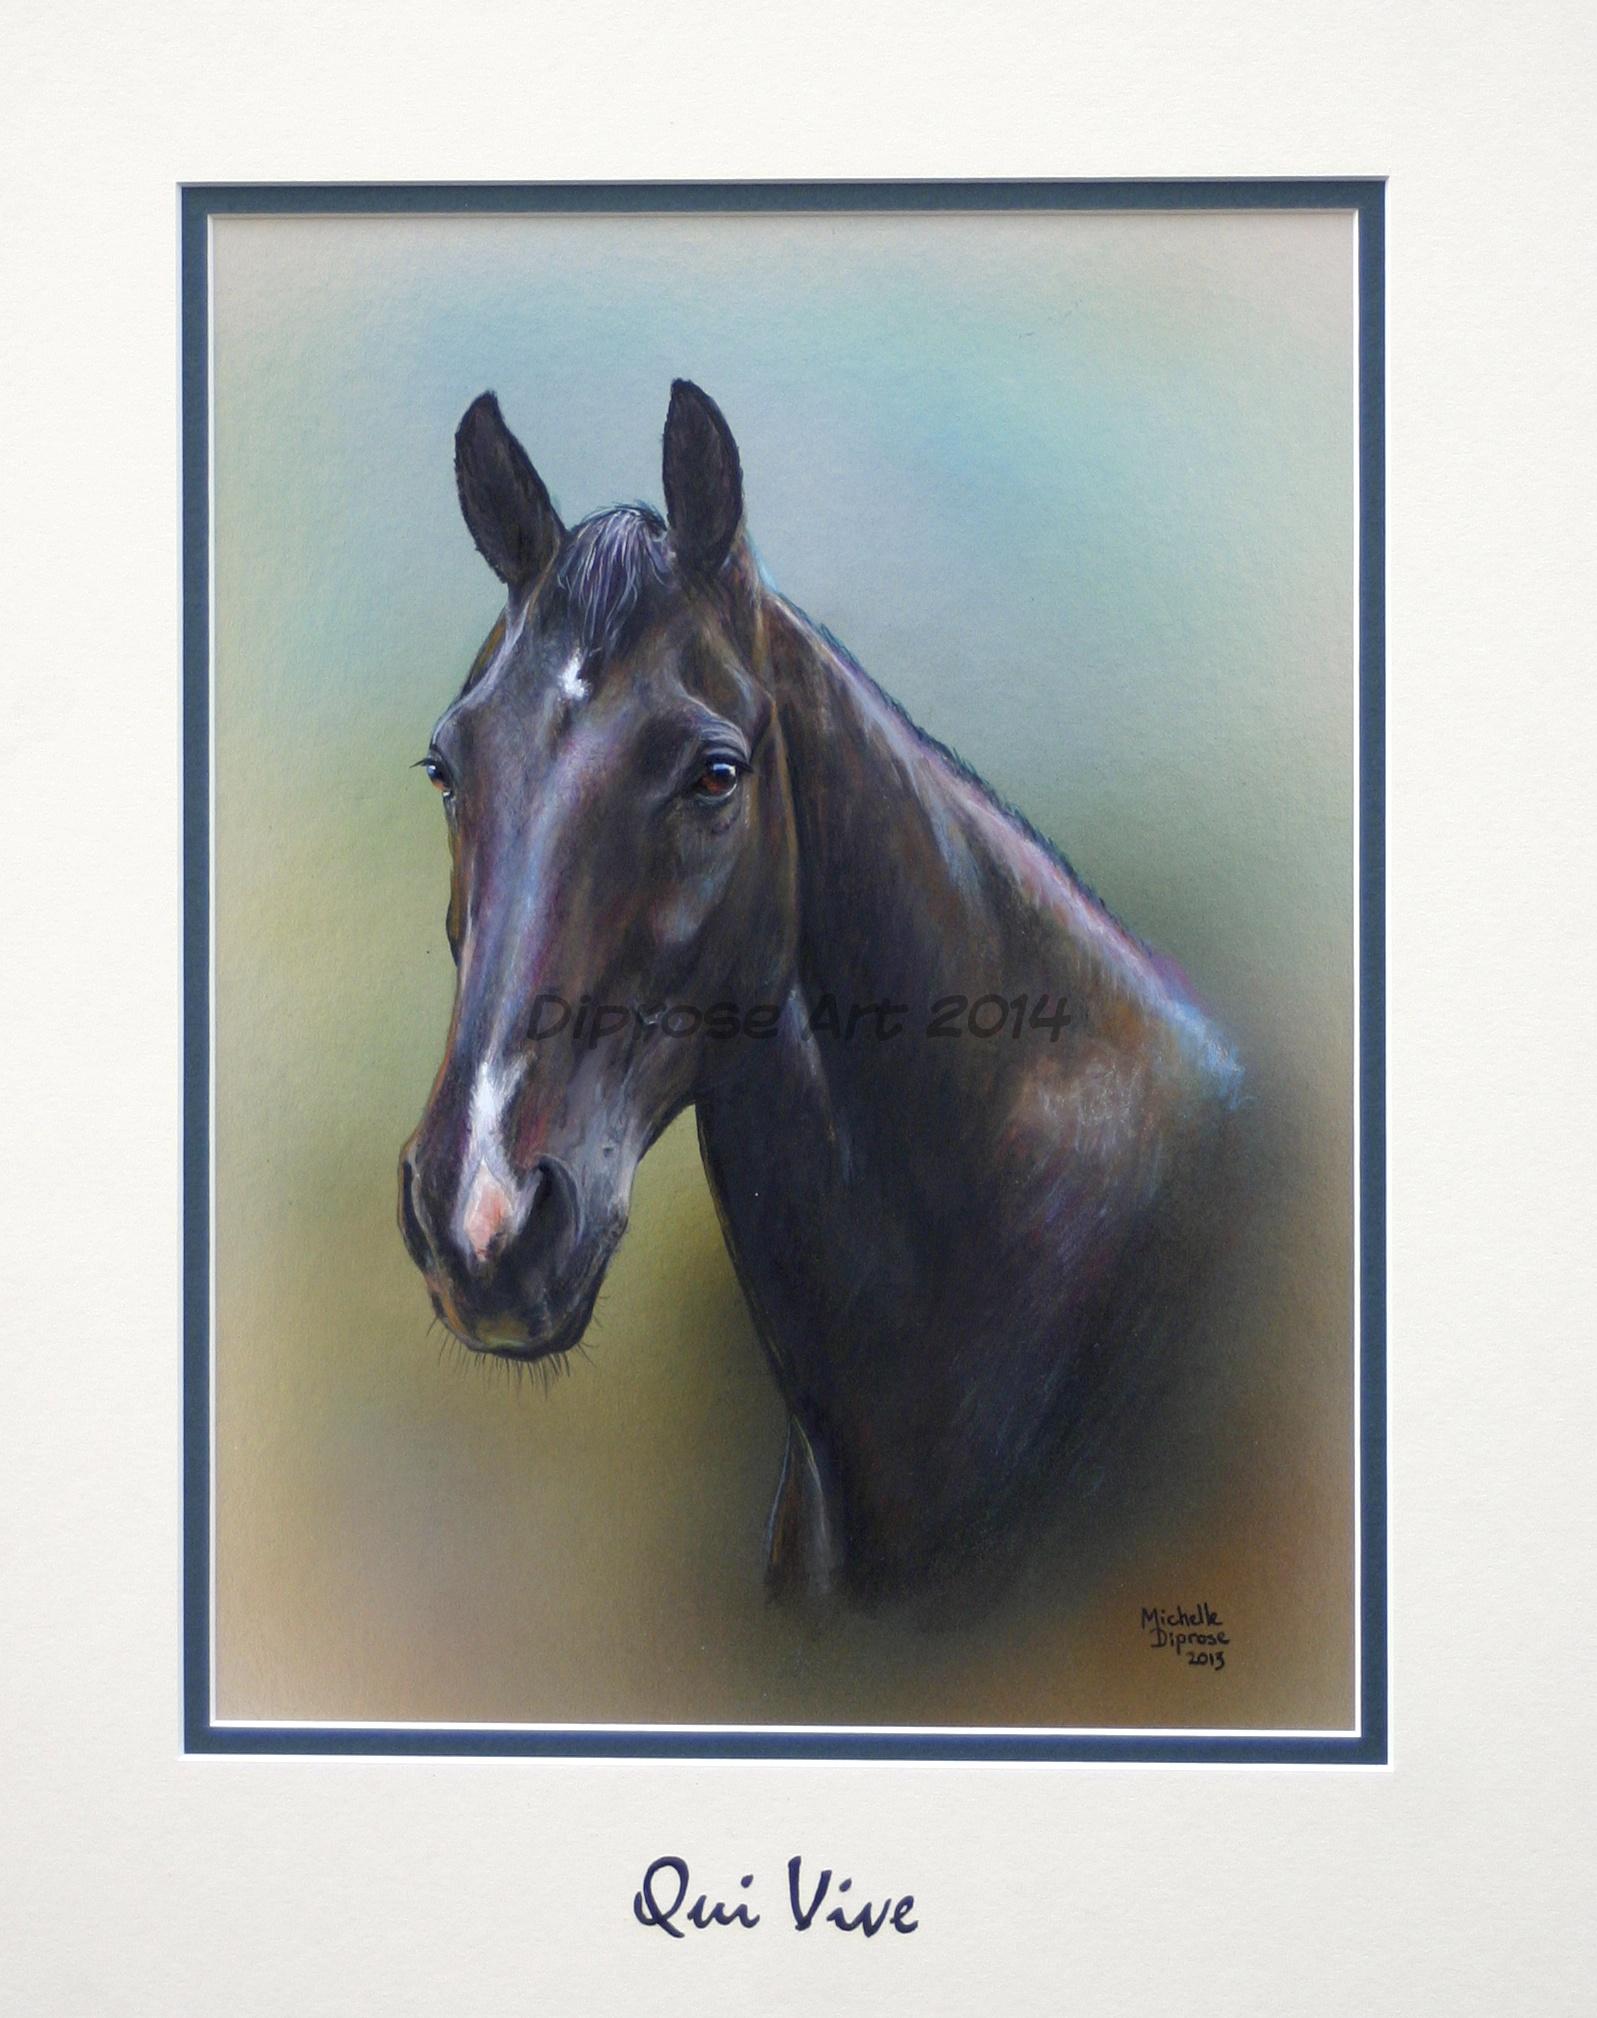 Acrylics on board - approx A4 -  horse portrait - Qui Vive is a beautiful black dressage star - he is talented and floats over the ground - I have never before seen a horse move as gracefully as him.